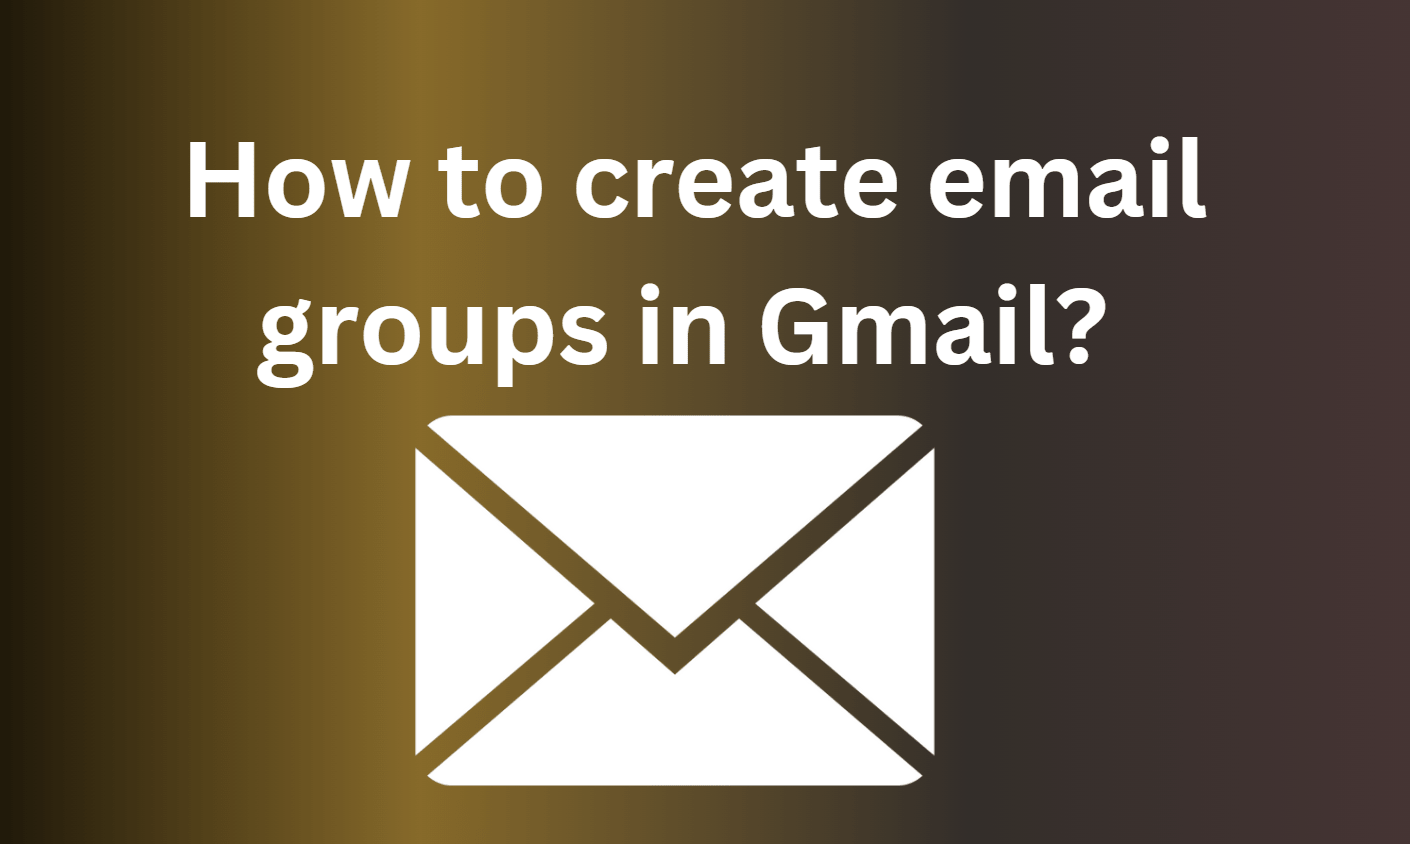 How to create email groups in Gmail